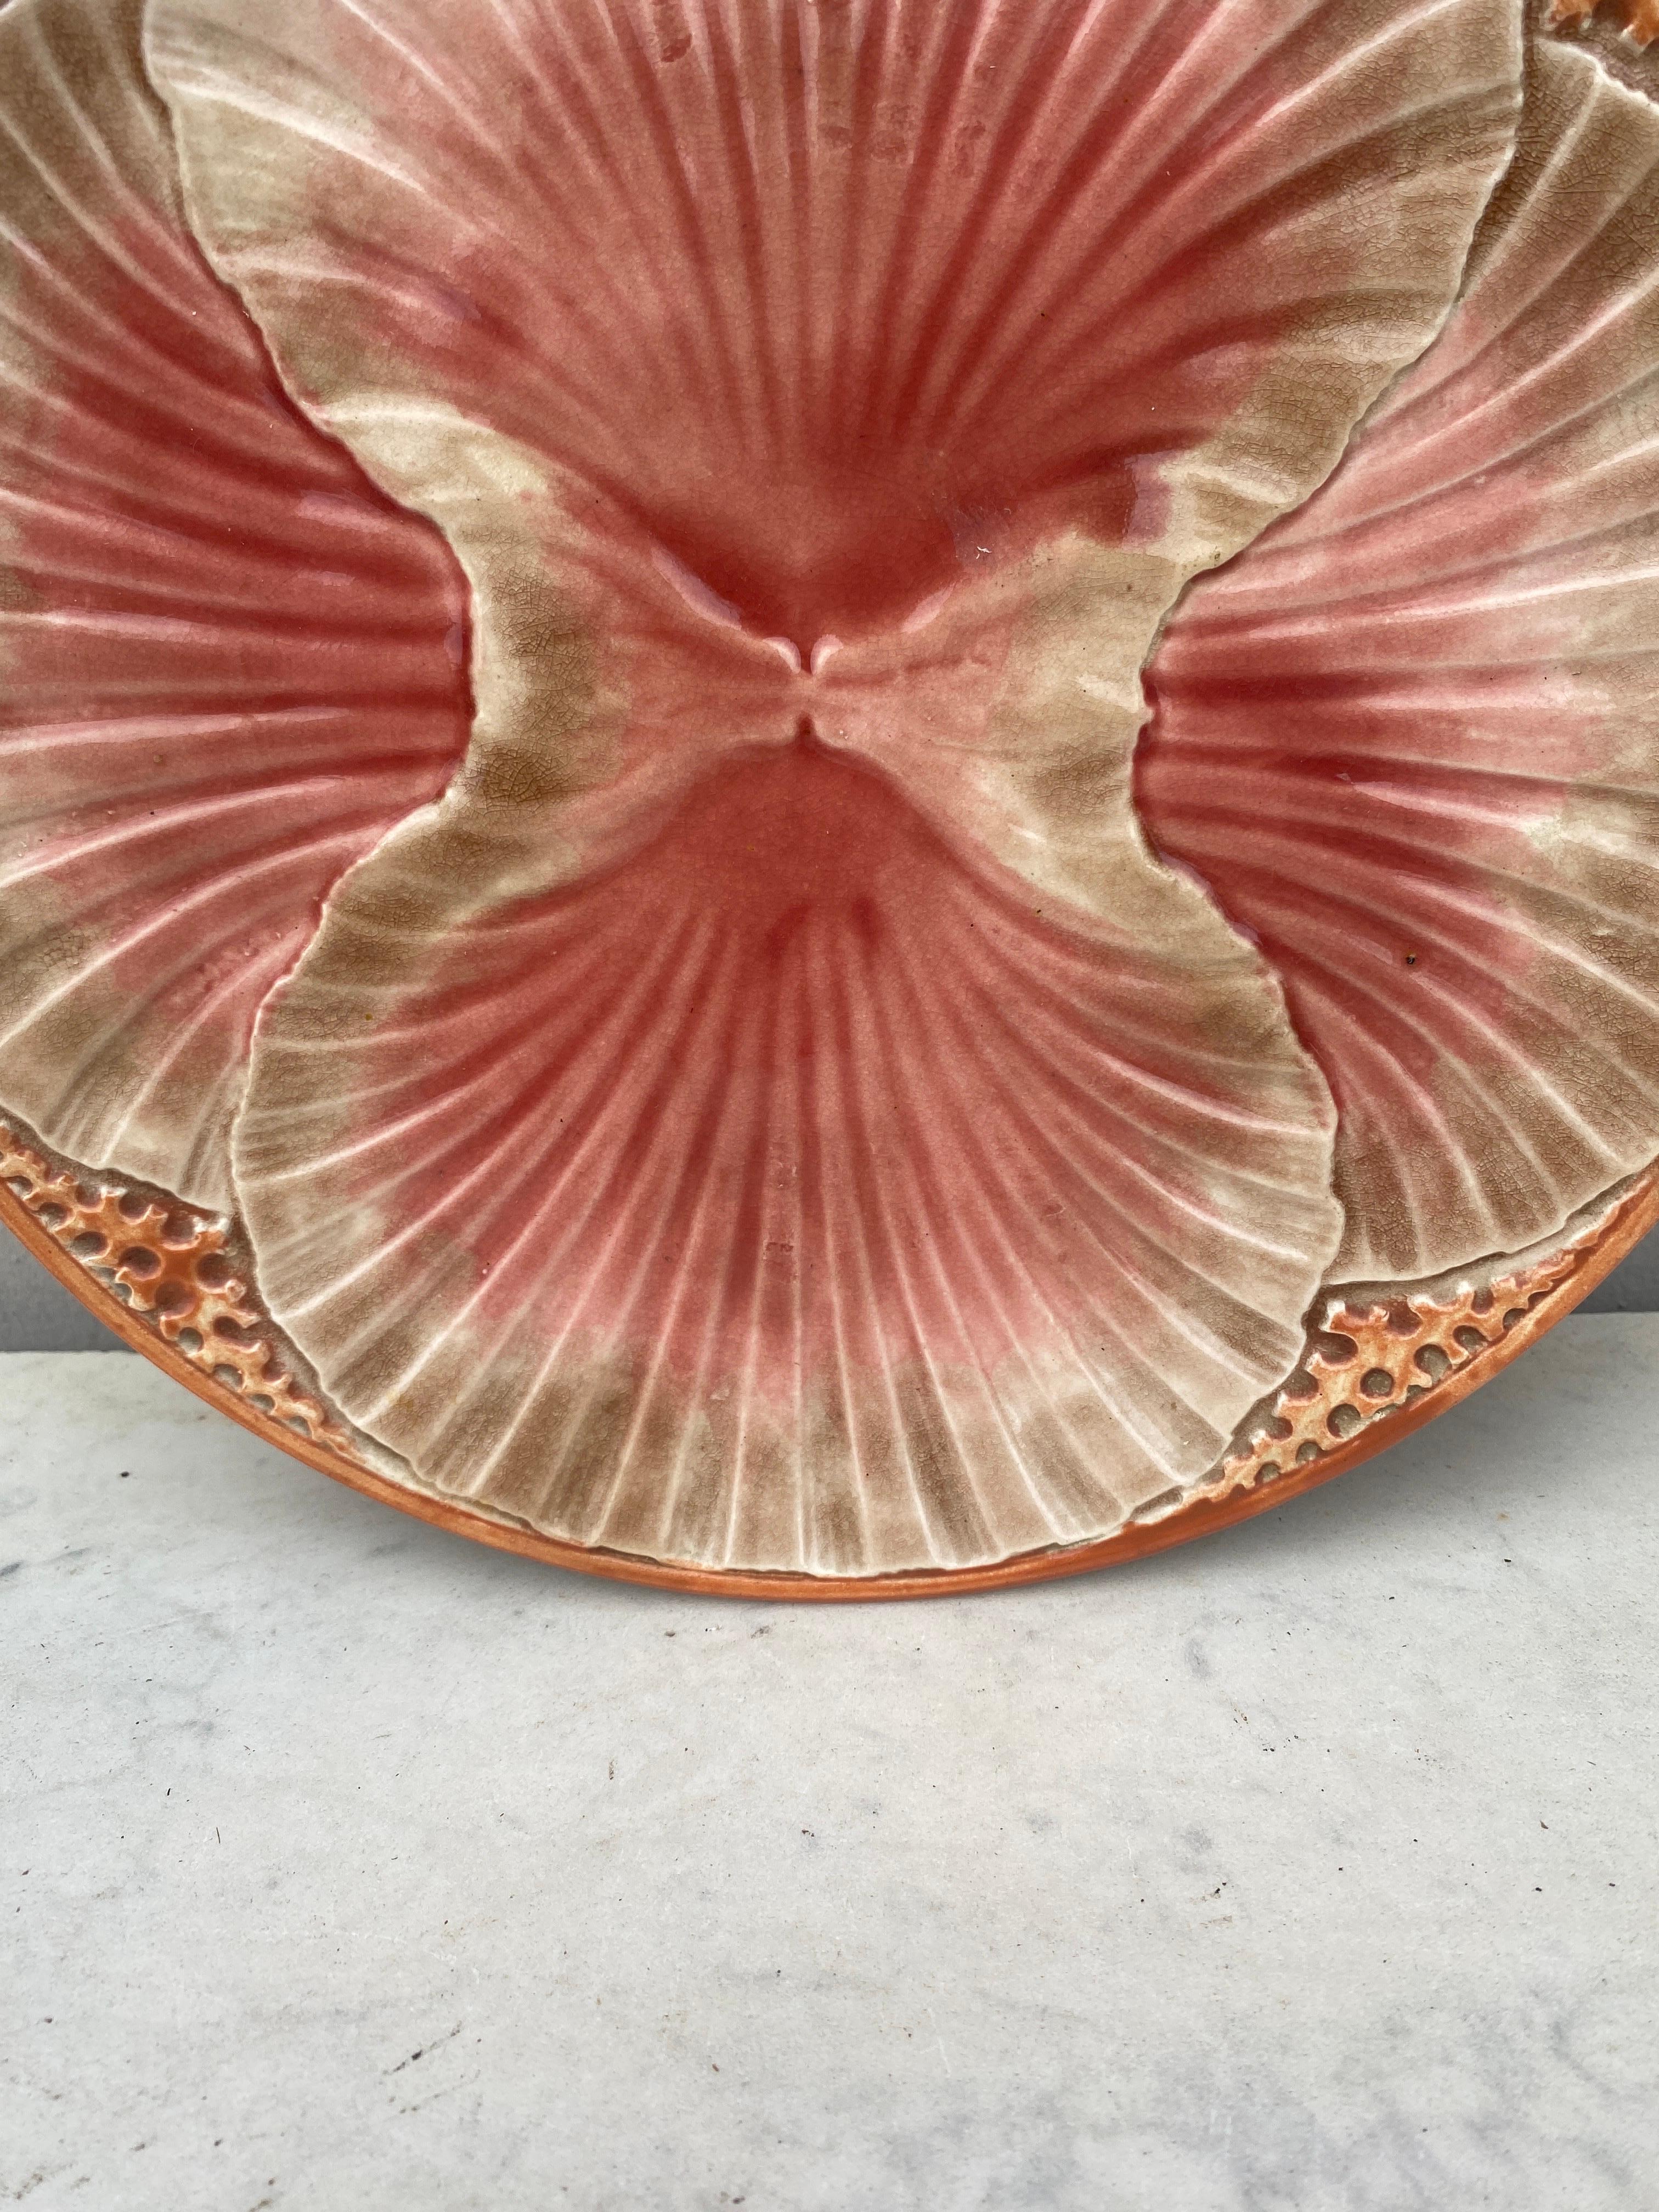 Large French Majolica Shell Plate Sarreguemines Circa 1920.
9.5 inches diameter.